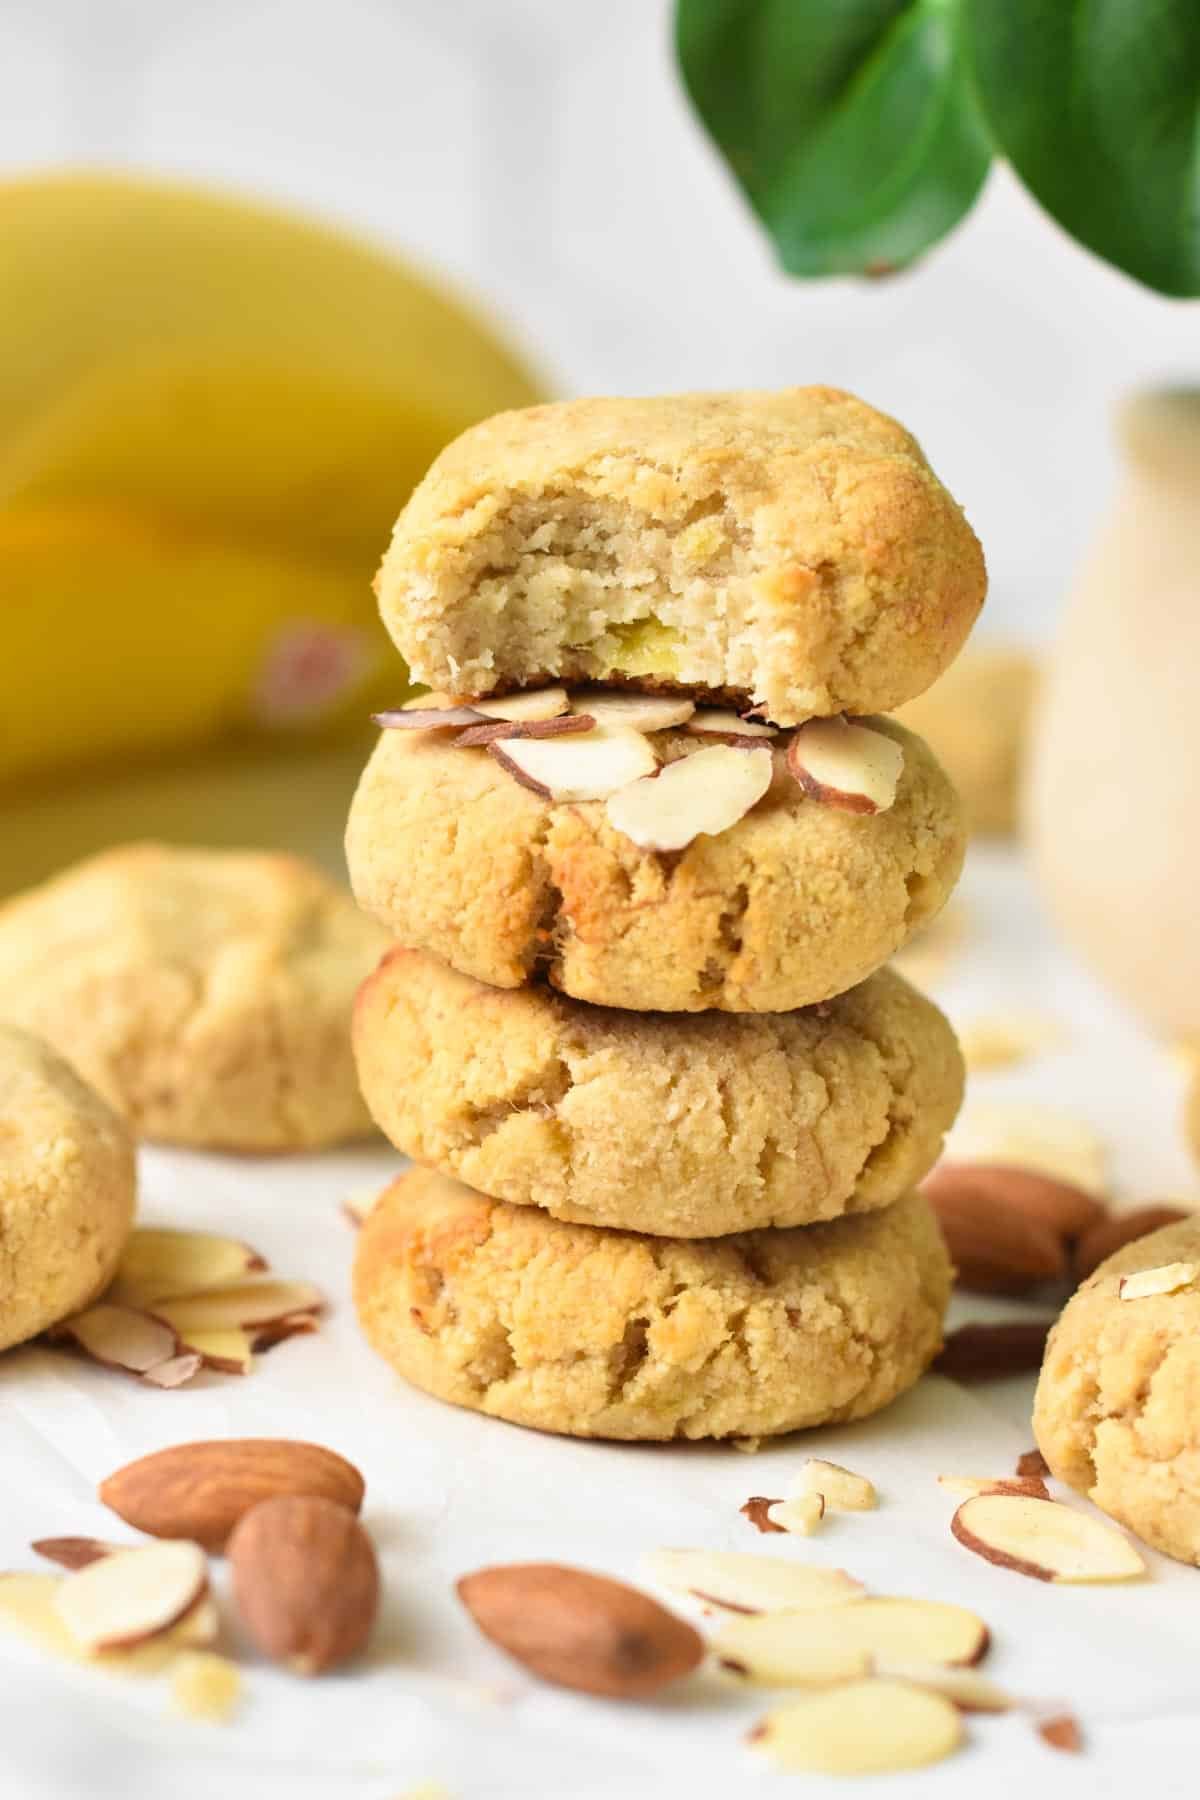 A stack of three Almond Flour Banana Cookies with the top cookie half beaten showing banana pieces in the dough.